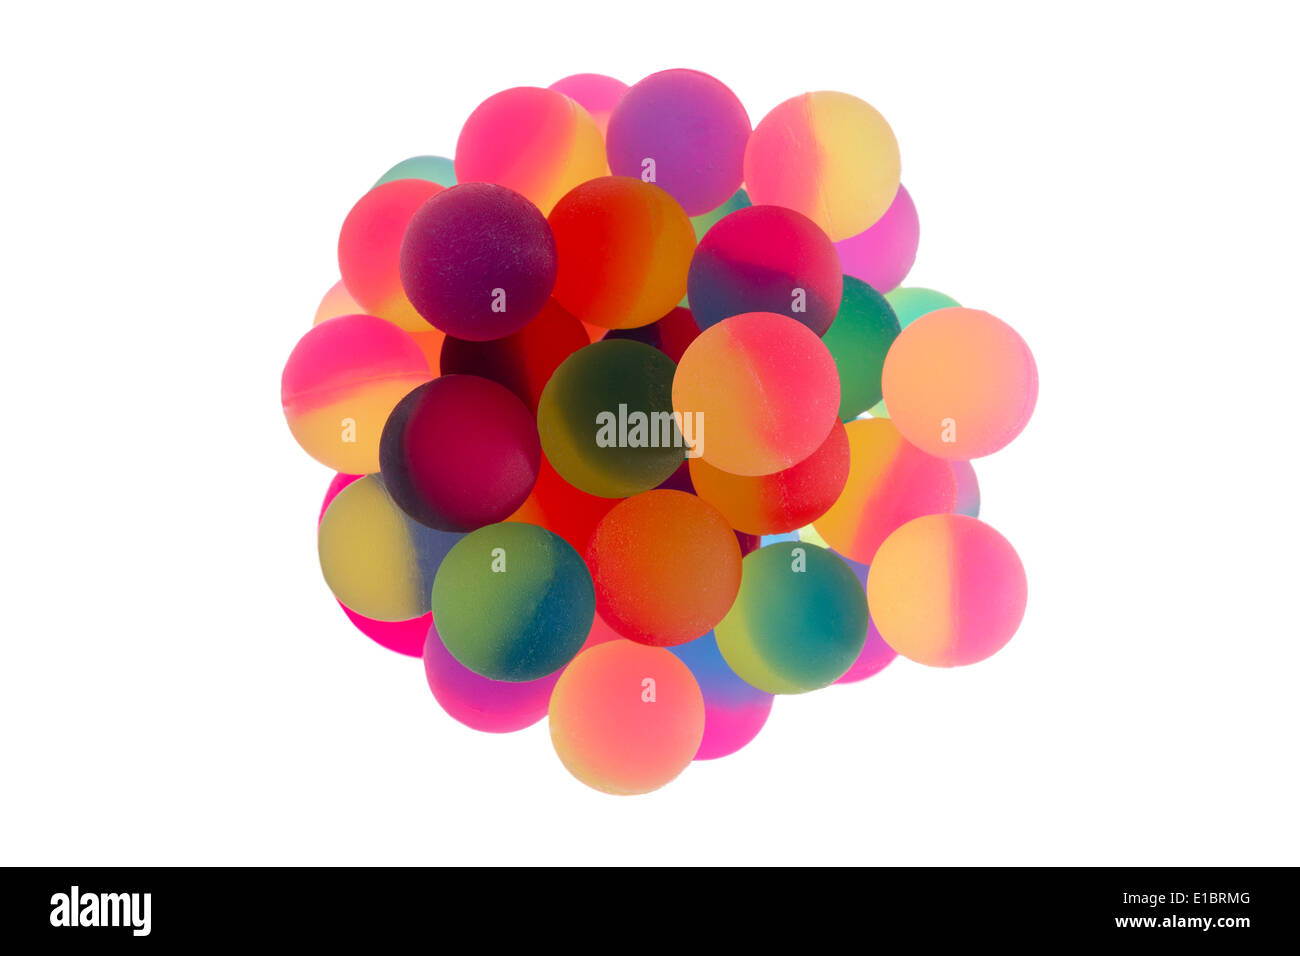 Cup filled with multiple bicolor plastic balls in vibrant rainbow colors viewed from above centered and isolated on a white back Stock Photo